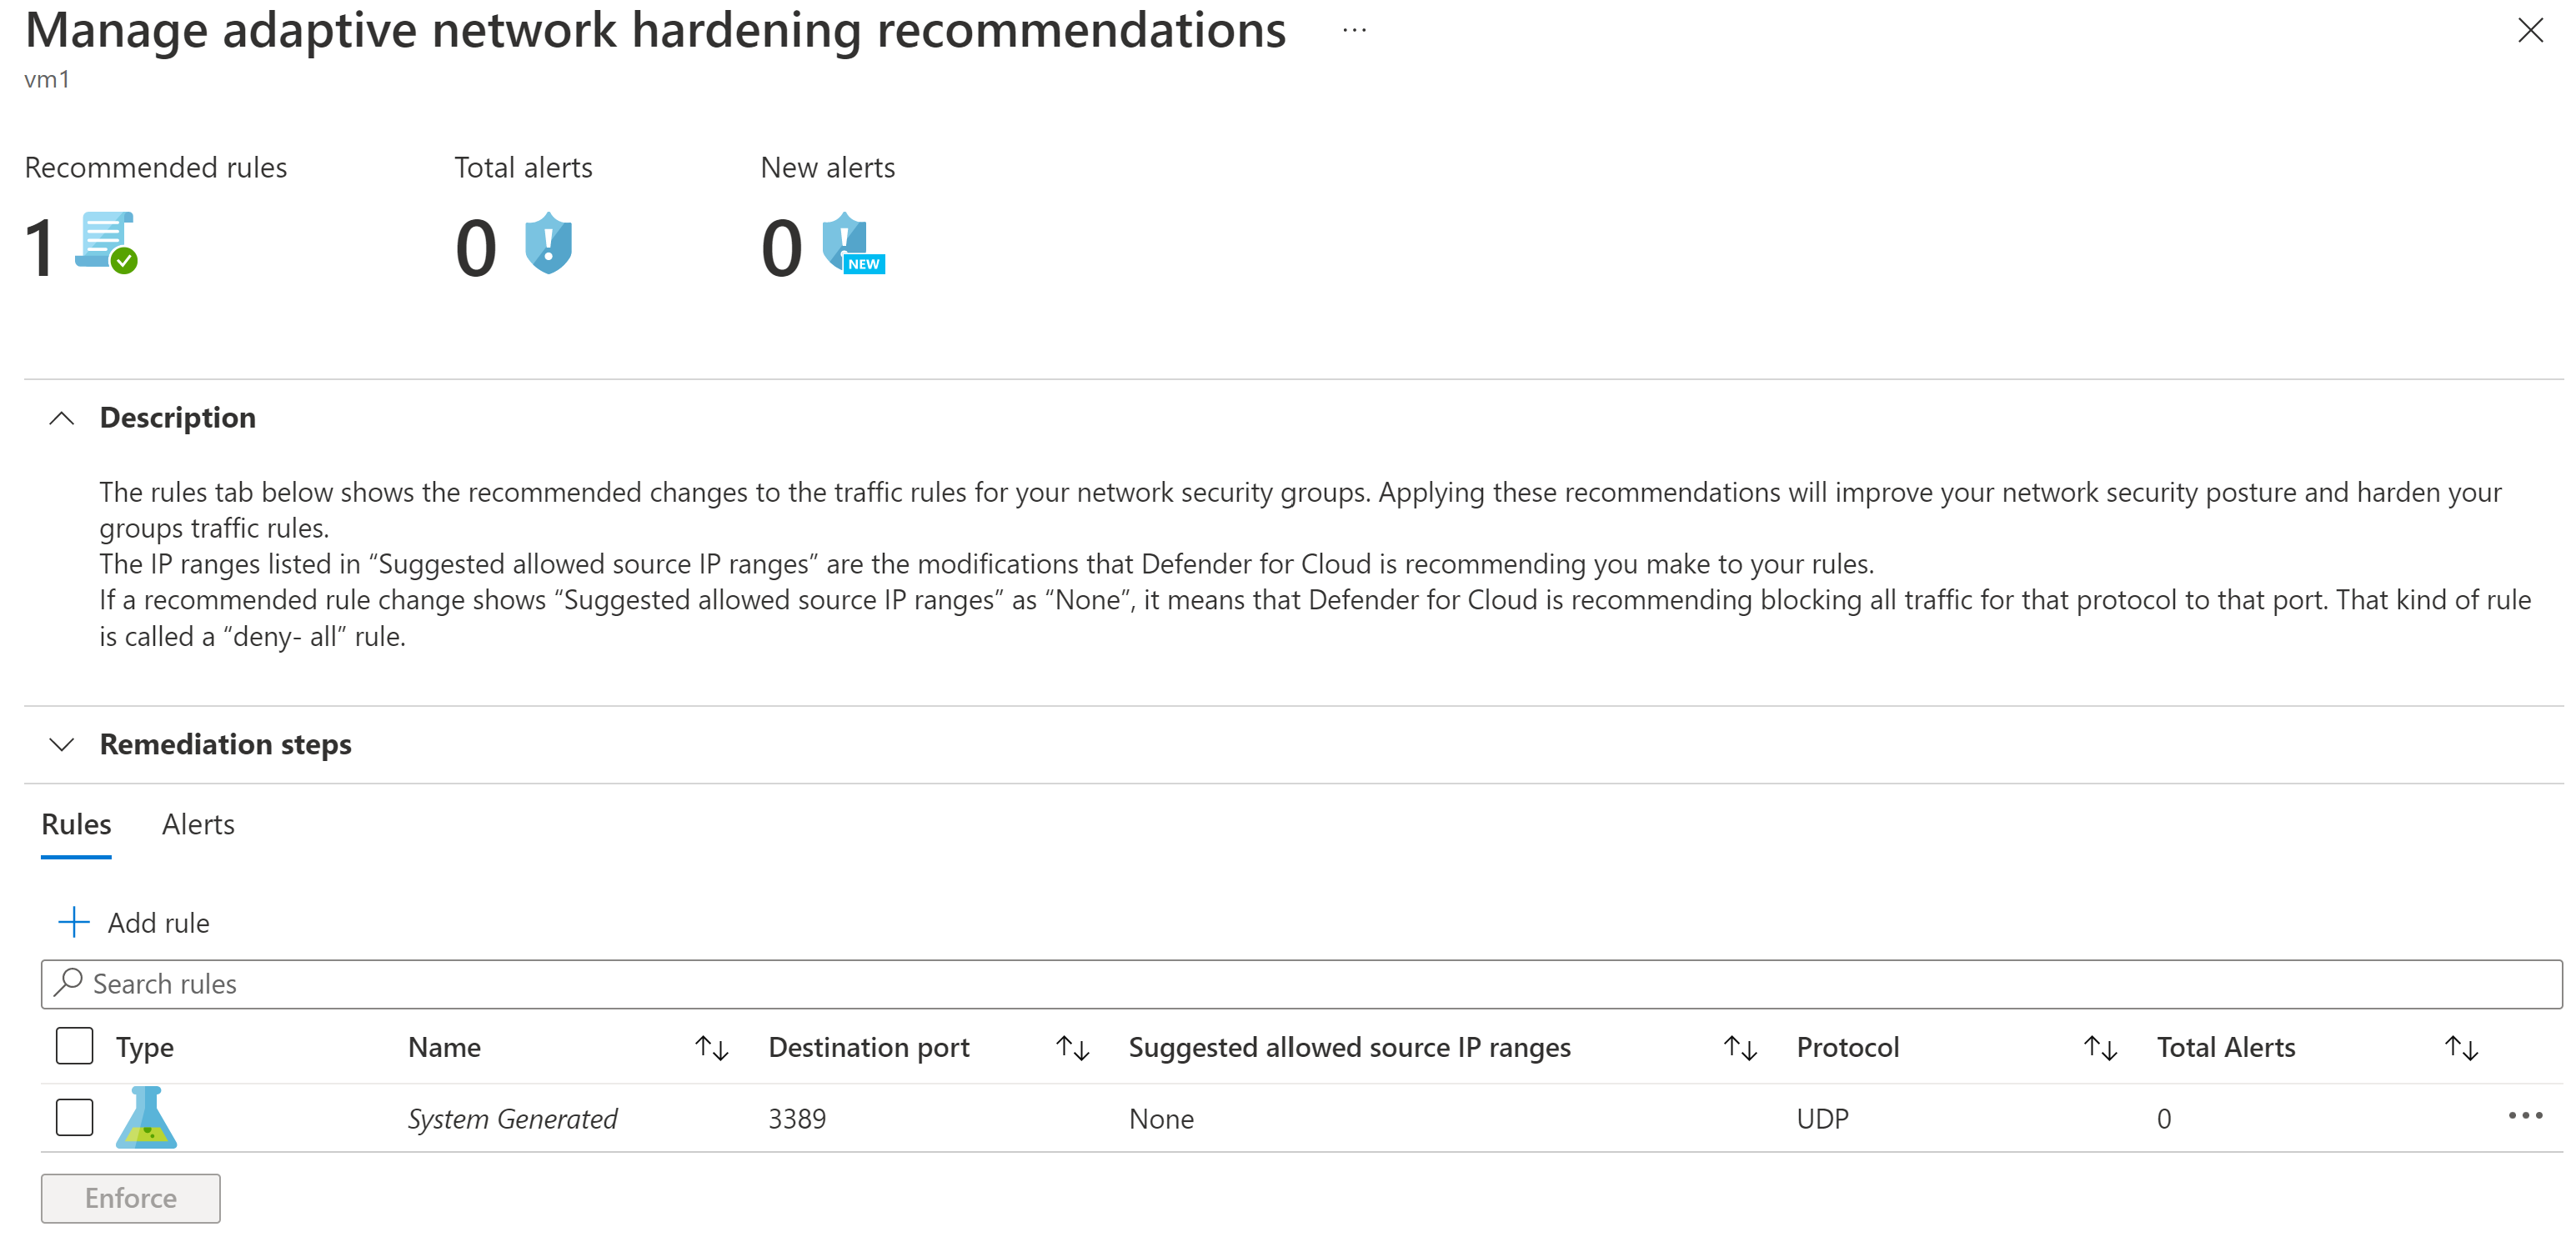 Screenshot of example network hardening recommendations.